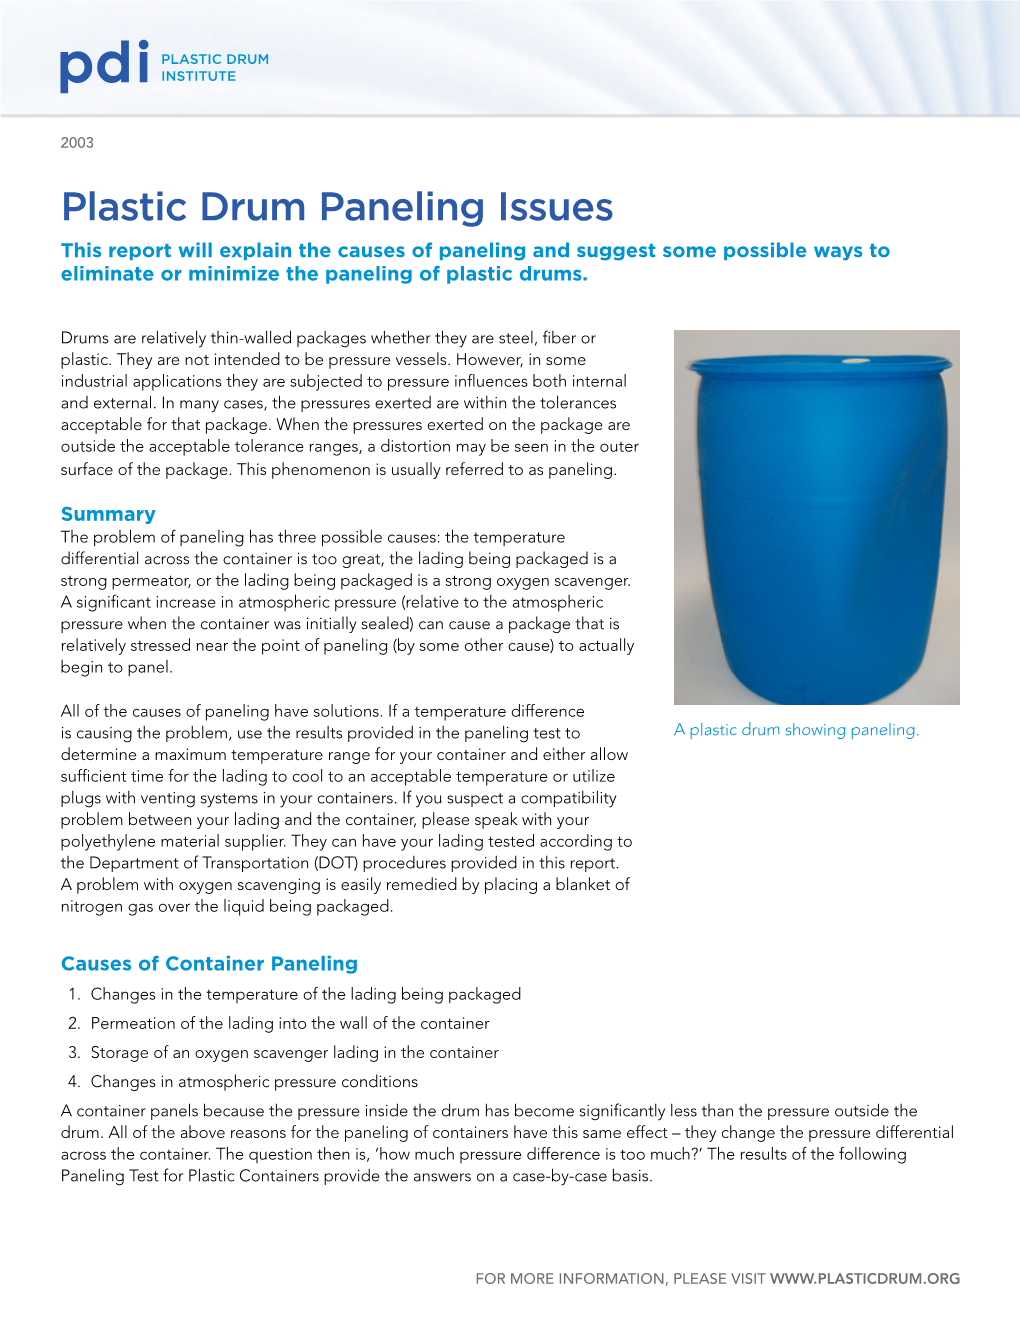 Plastic Drum Paneling Issues This Report Will Explain the Causes of Paneling and Suggest Some Possible Ways to Eliminate Or Minimize the Paneling of Plastic Drums